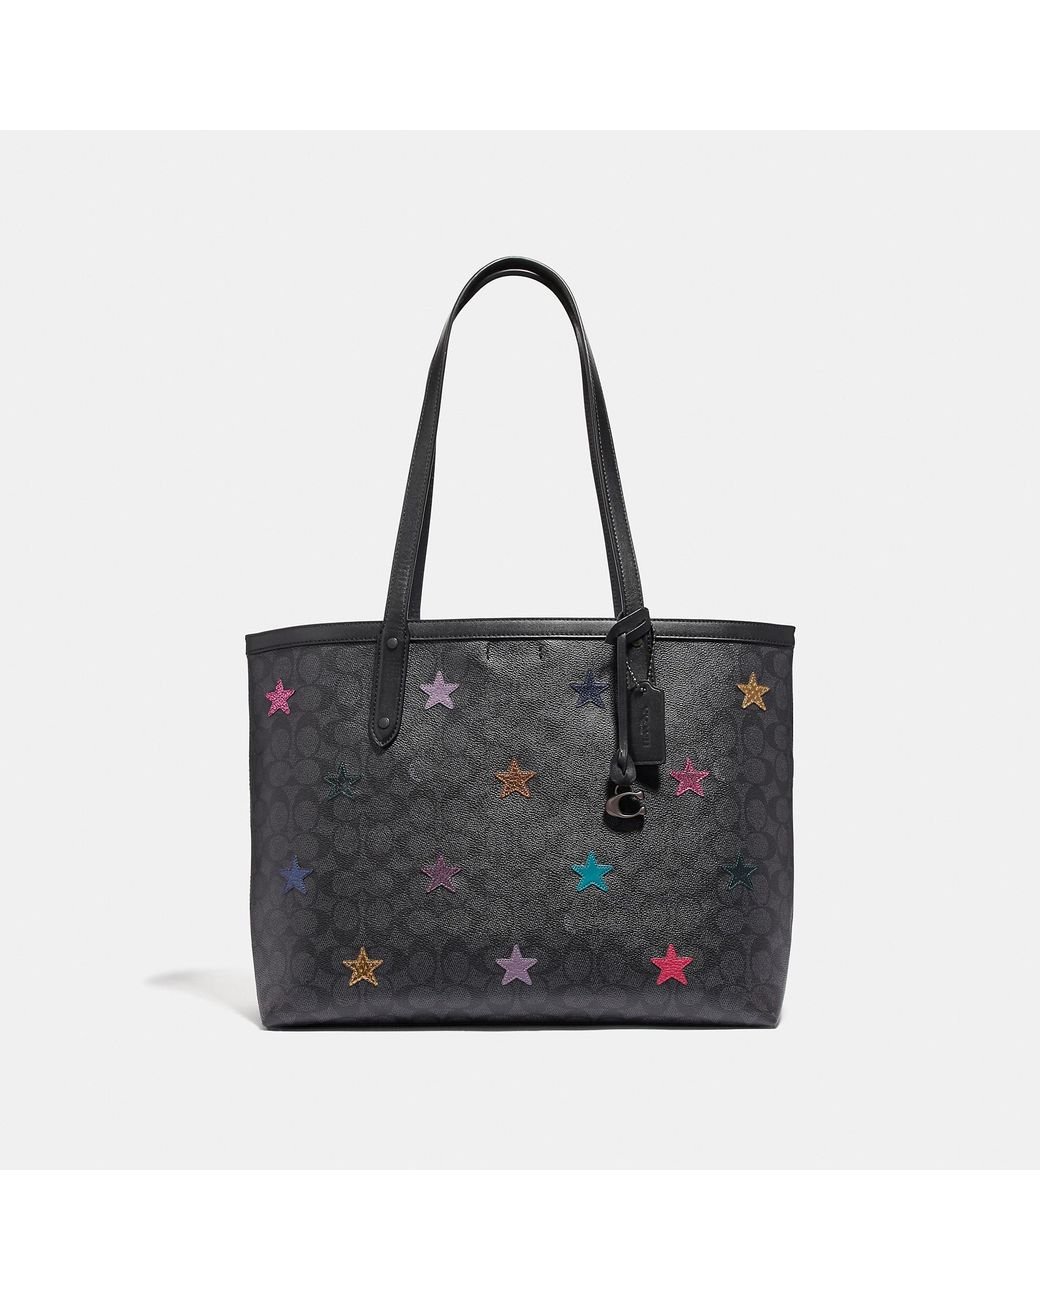 COACH Central Tote In Signature Canvas With Star Applique And Snakeskin  Detail in Black | Lyst